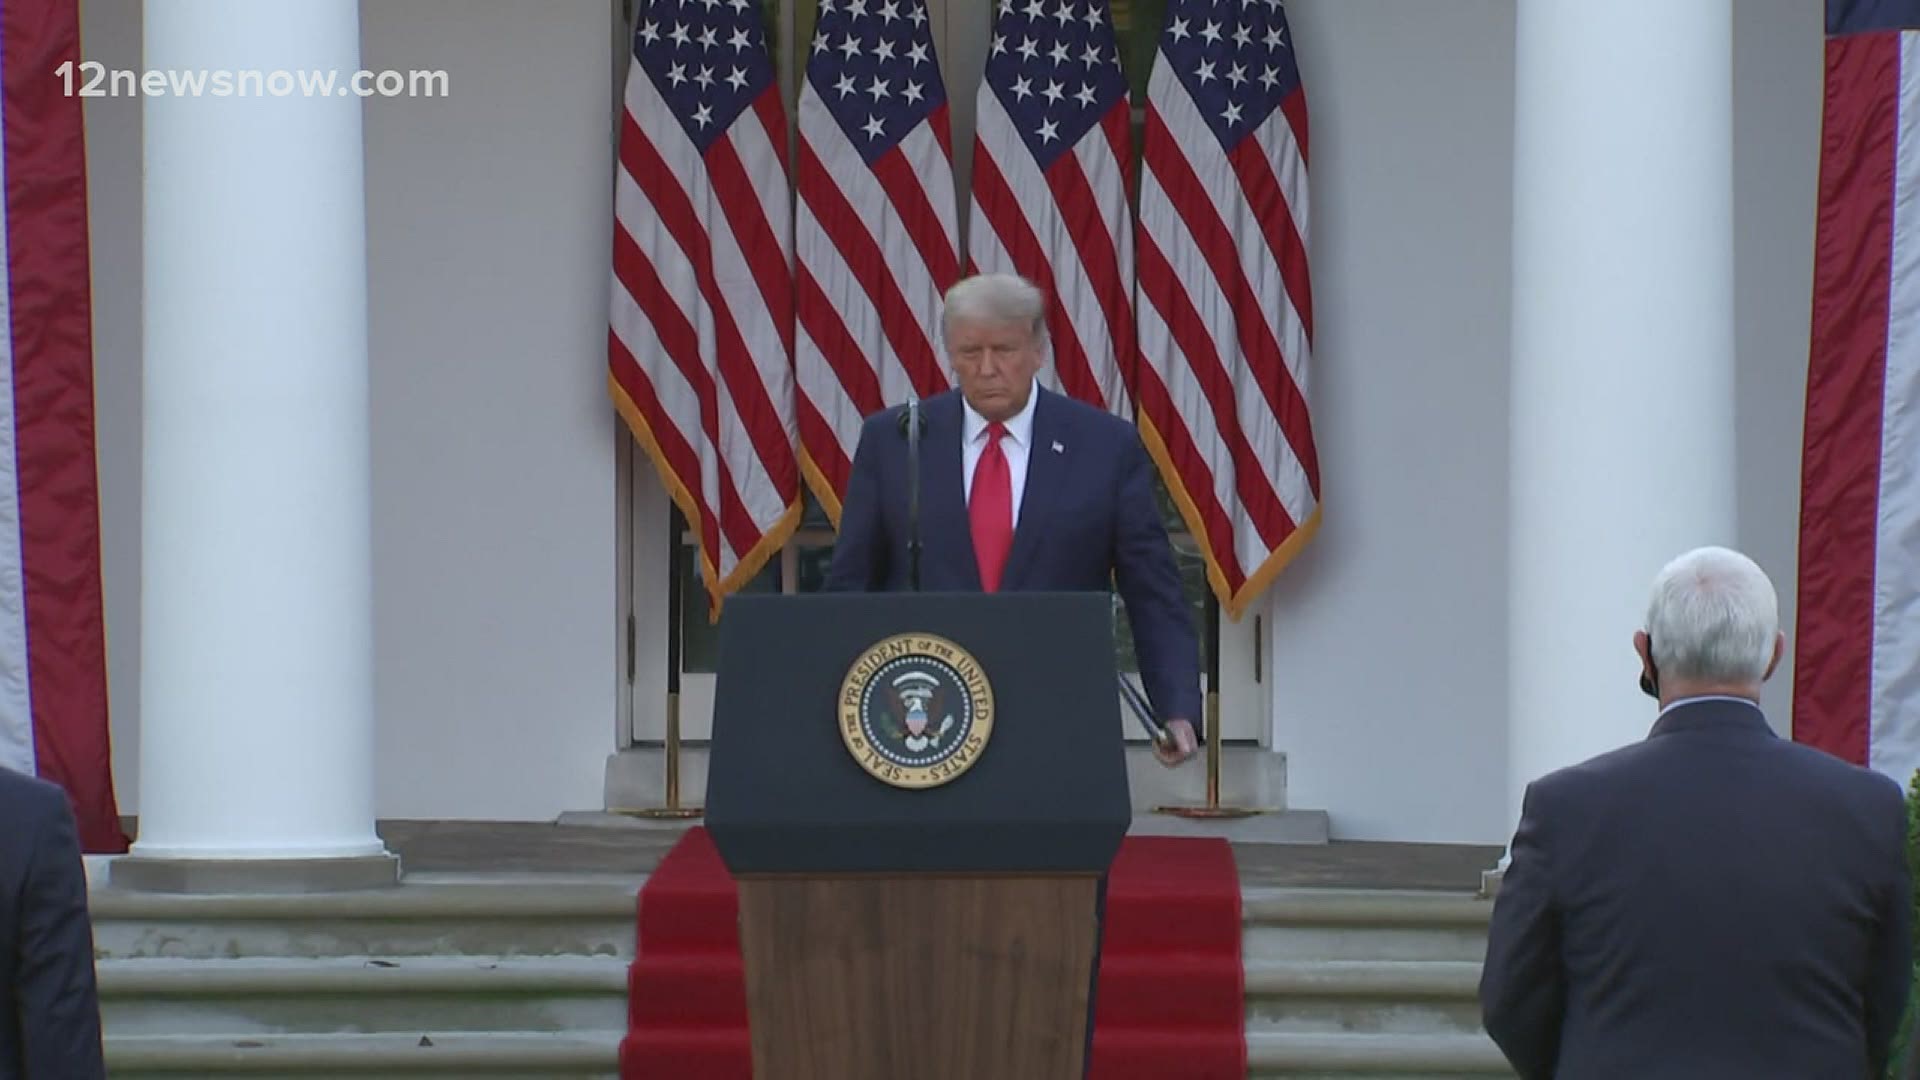 President Trump spoke Friday for the first time since election night. He focused on a COVID-19 vaccine, saying one will be available as soon as April.